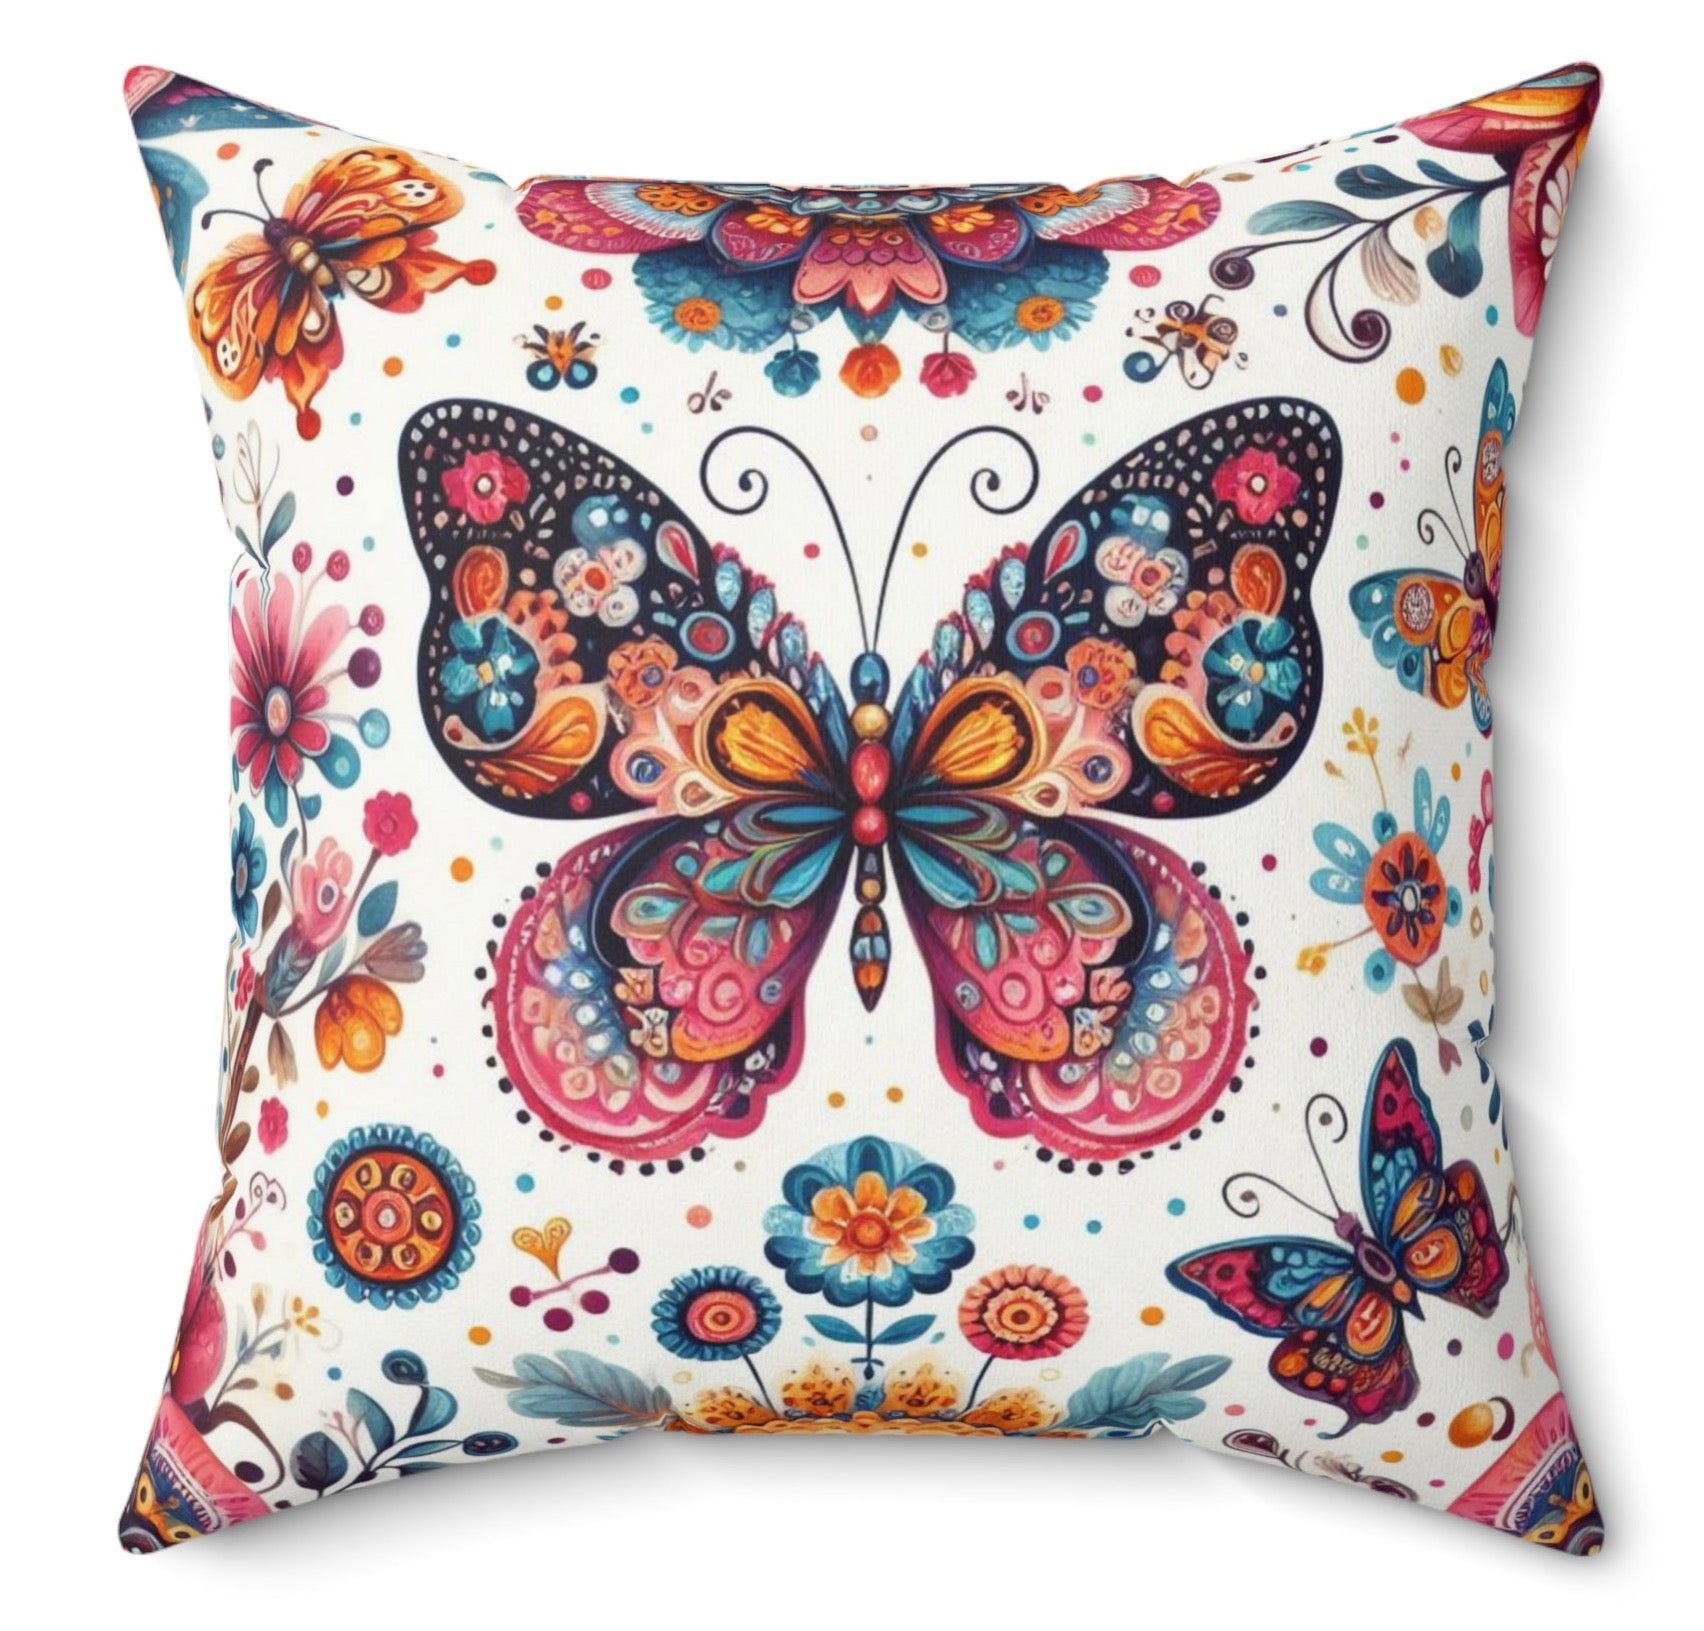 Floral Vintage Bohemian Butterfly Maximalist Throw Pillow Polyester Square Cover